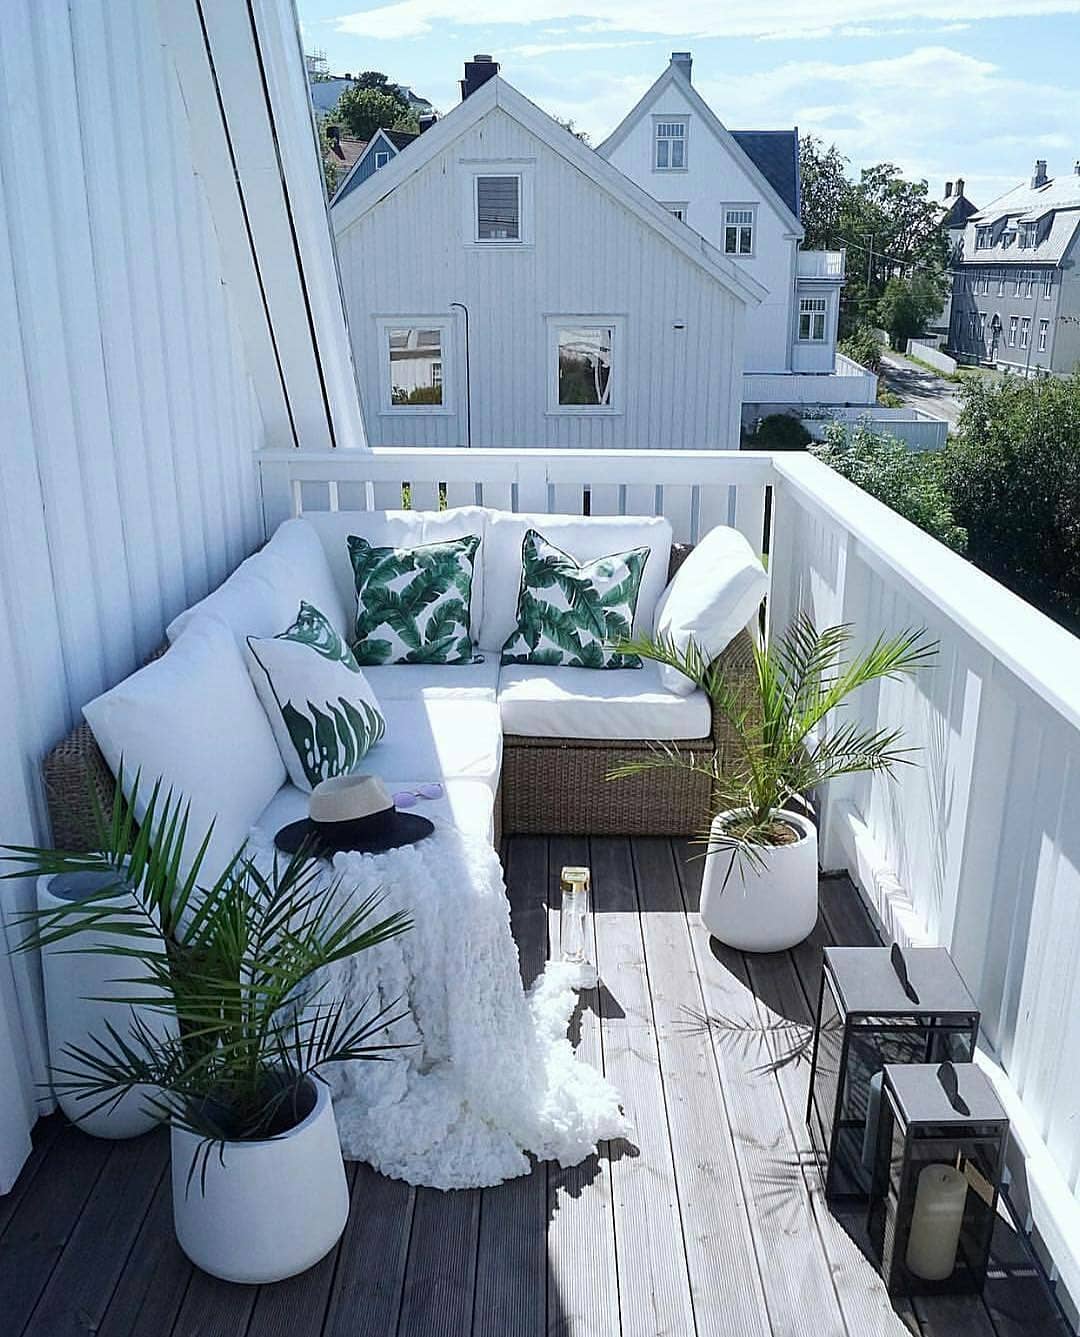 40 Cozy Balcony Ideas and Decor Inspiration 2019 - Page 16 of 41 - My Blog